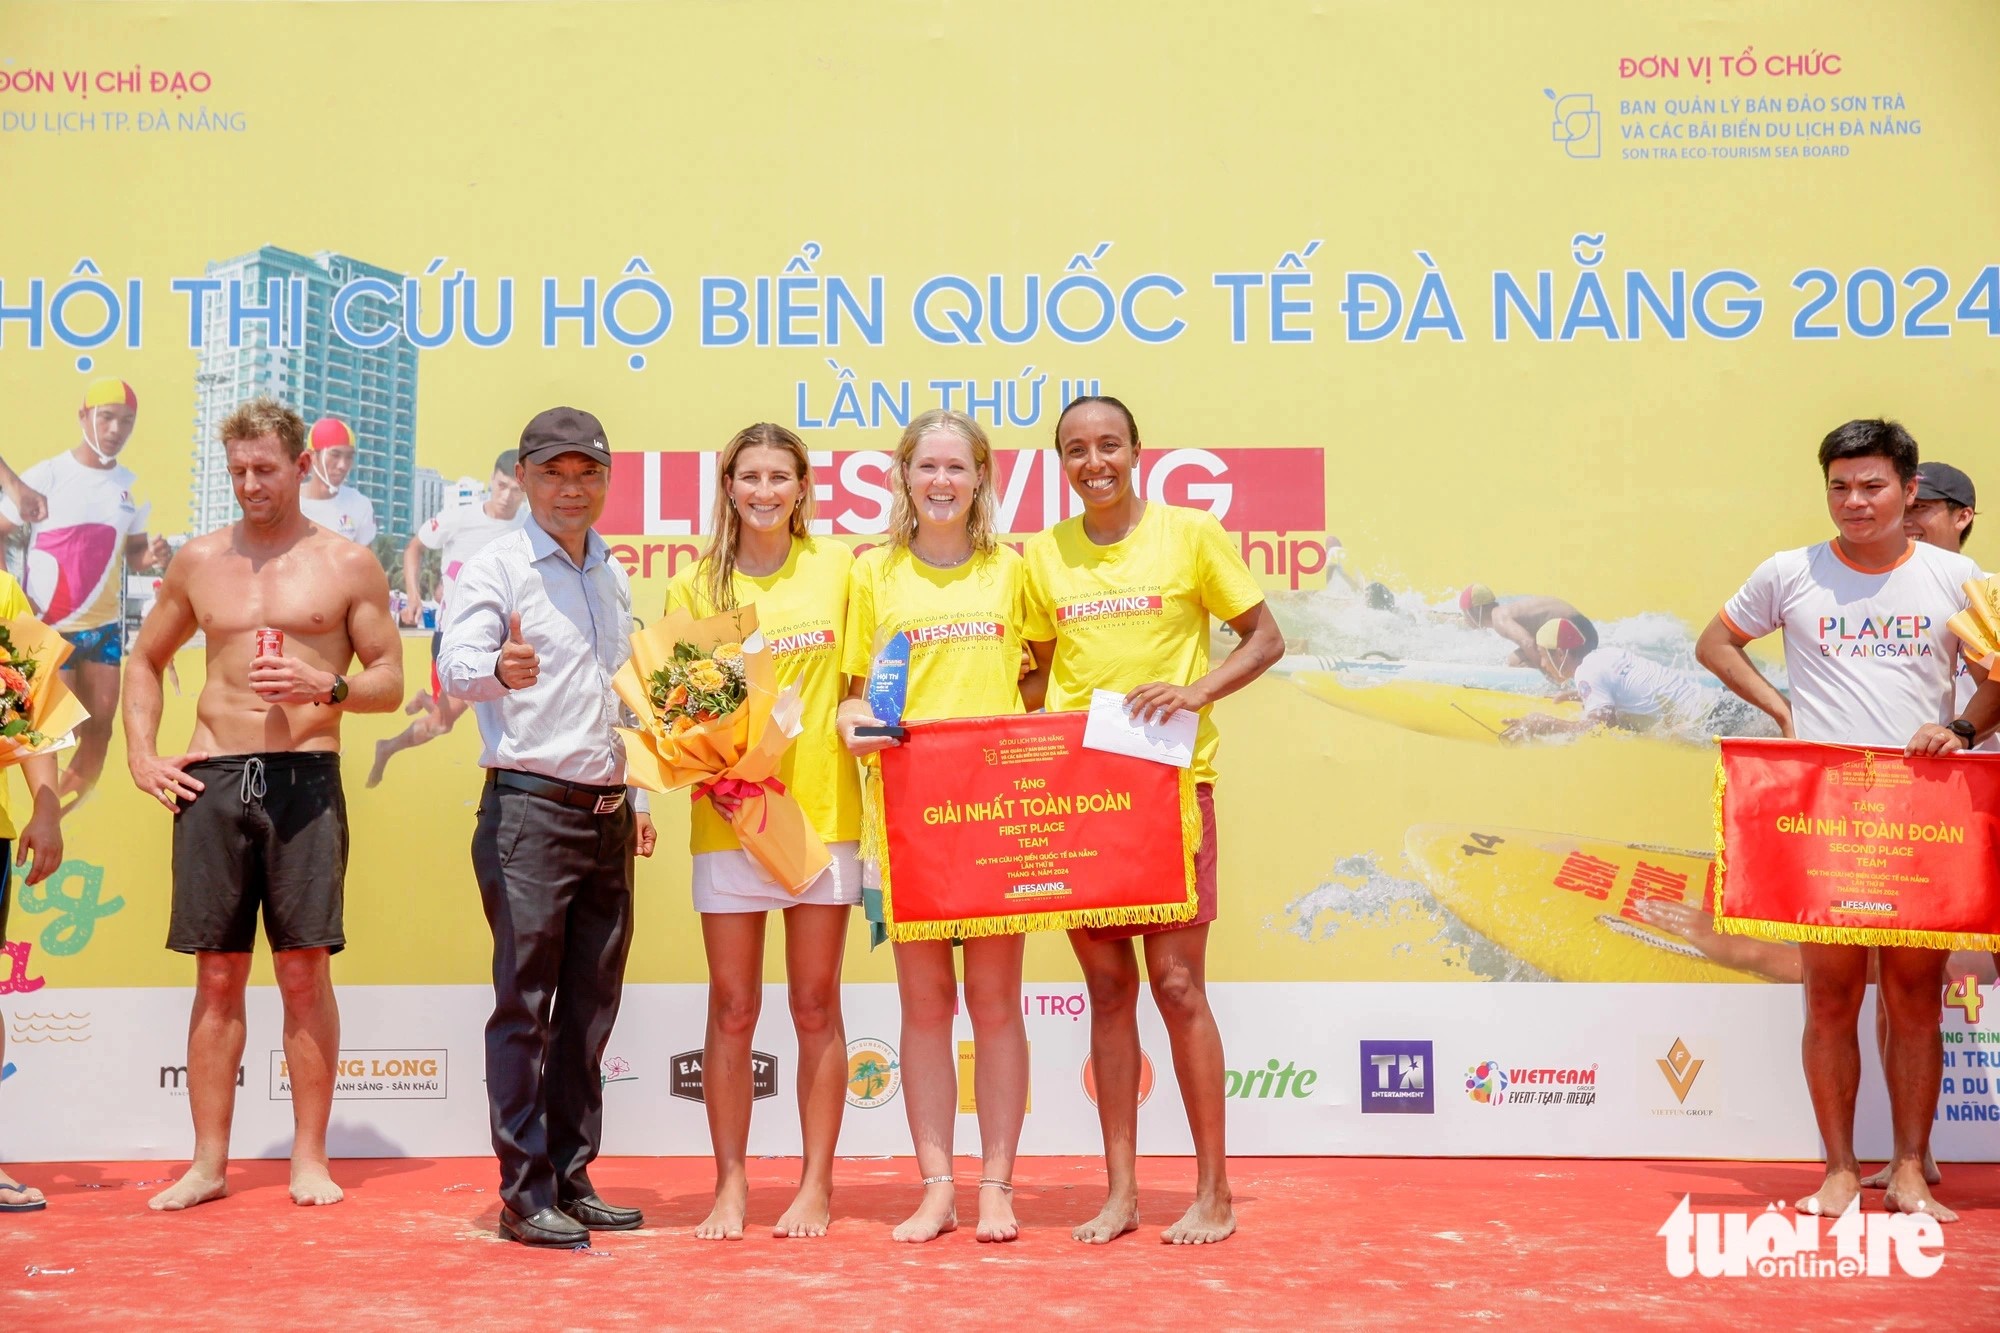 The Australian team secures first prize for their outstanding overall performance. (Photo: Doan Nhan / Tuoi Tre